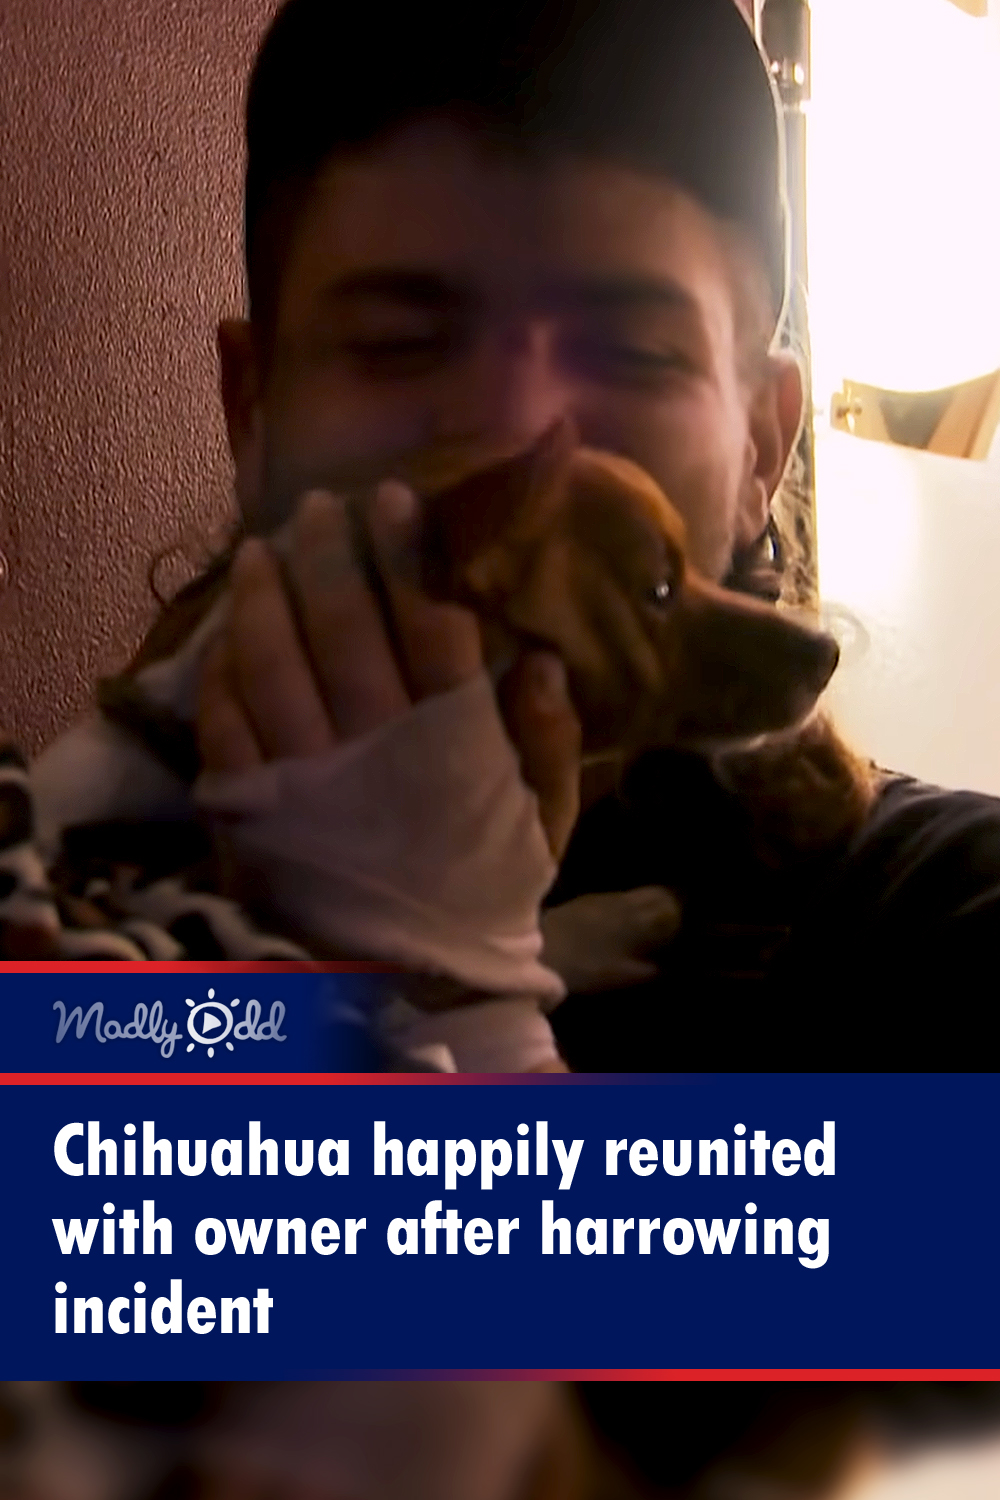 Chihuahua happily reunited with owner after harrowing incident